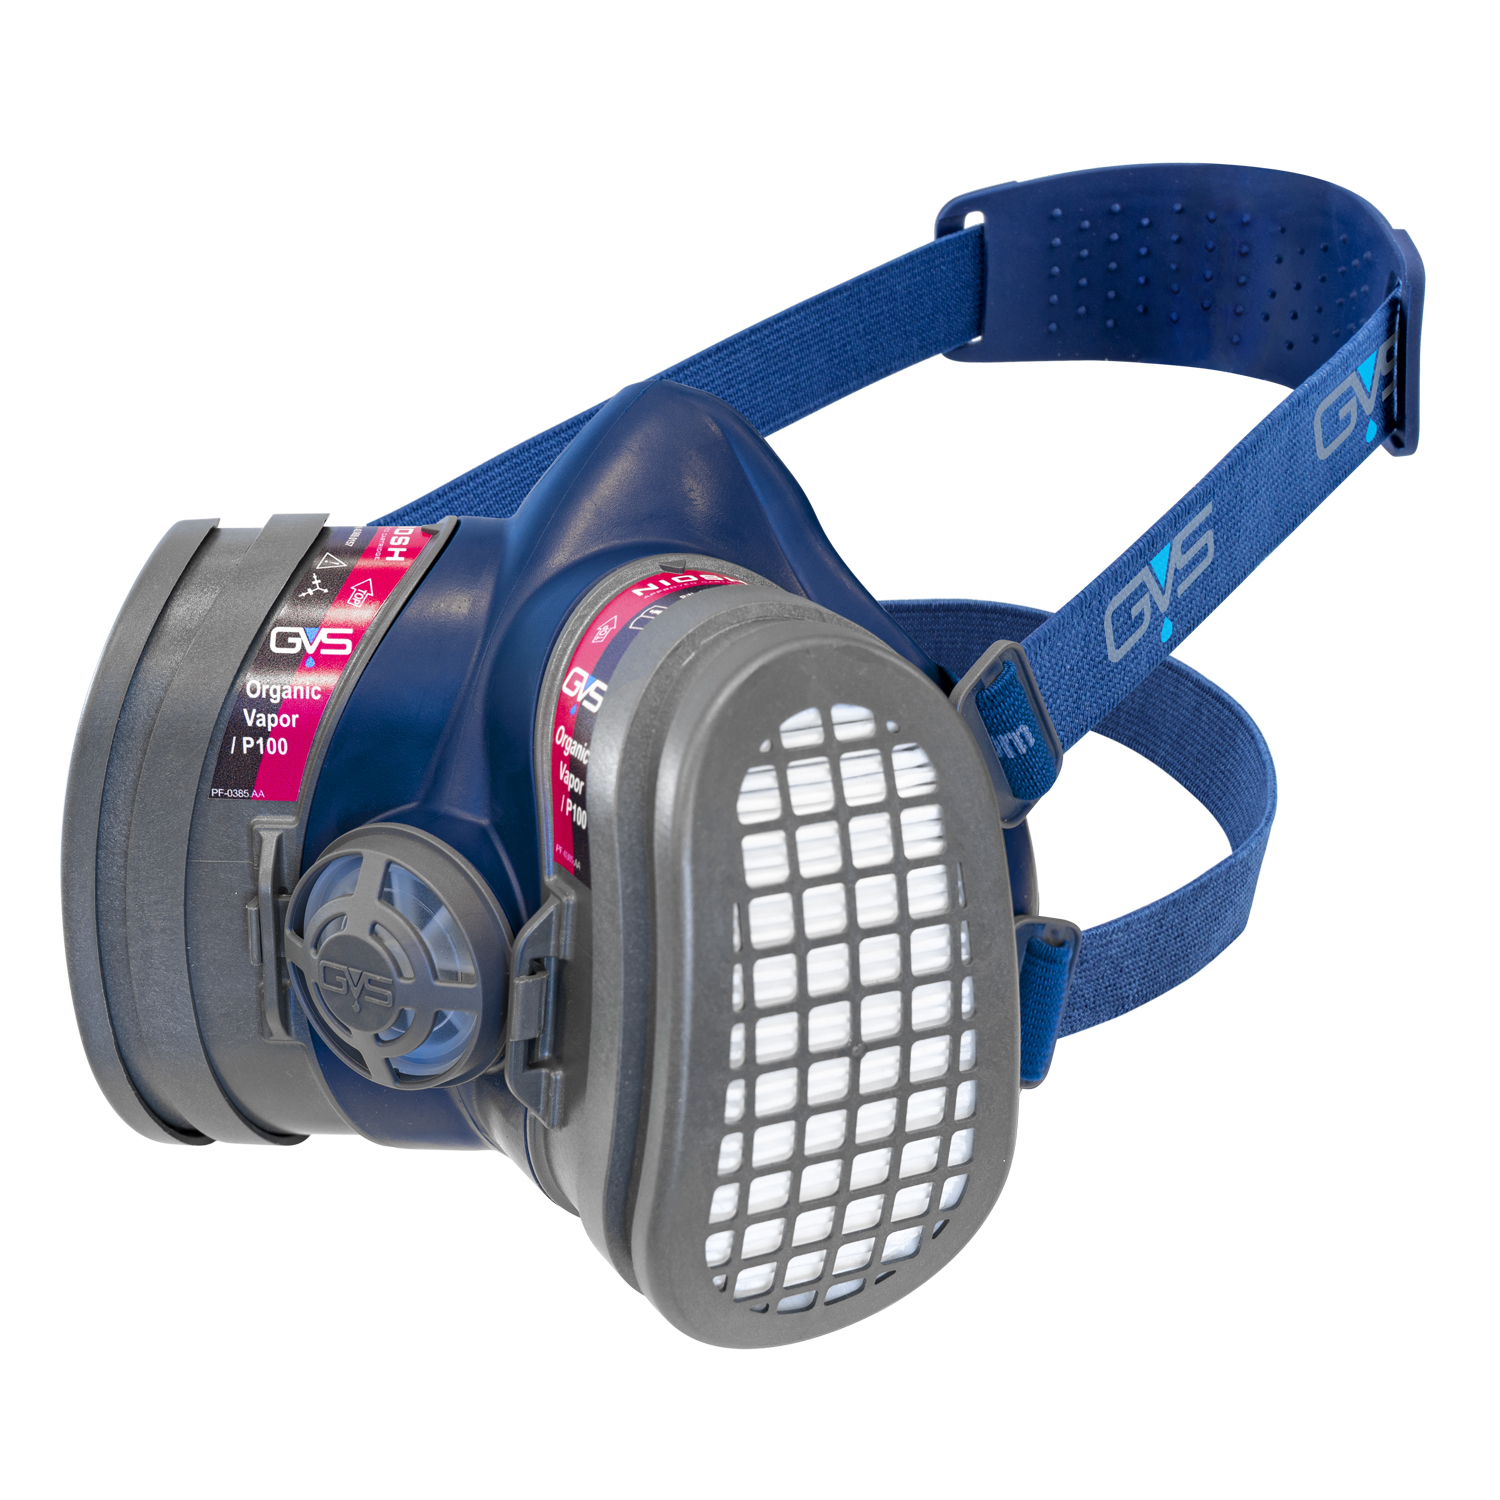 SPR656 S/M Mask w/Organic Vapor/P100 filter and integrated goggles